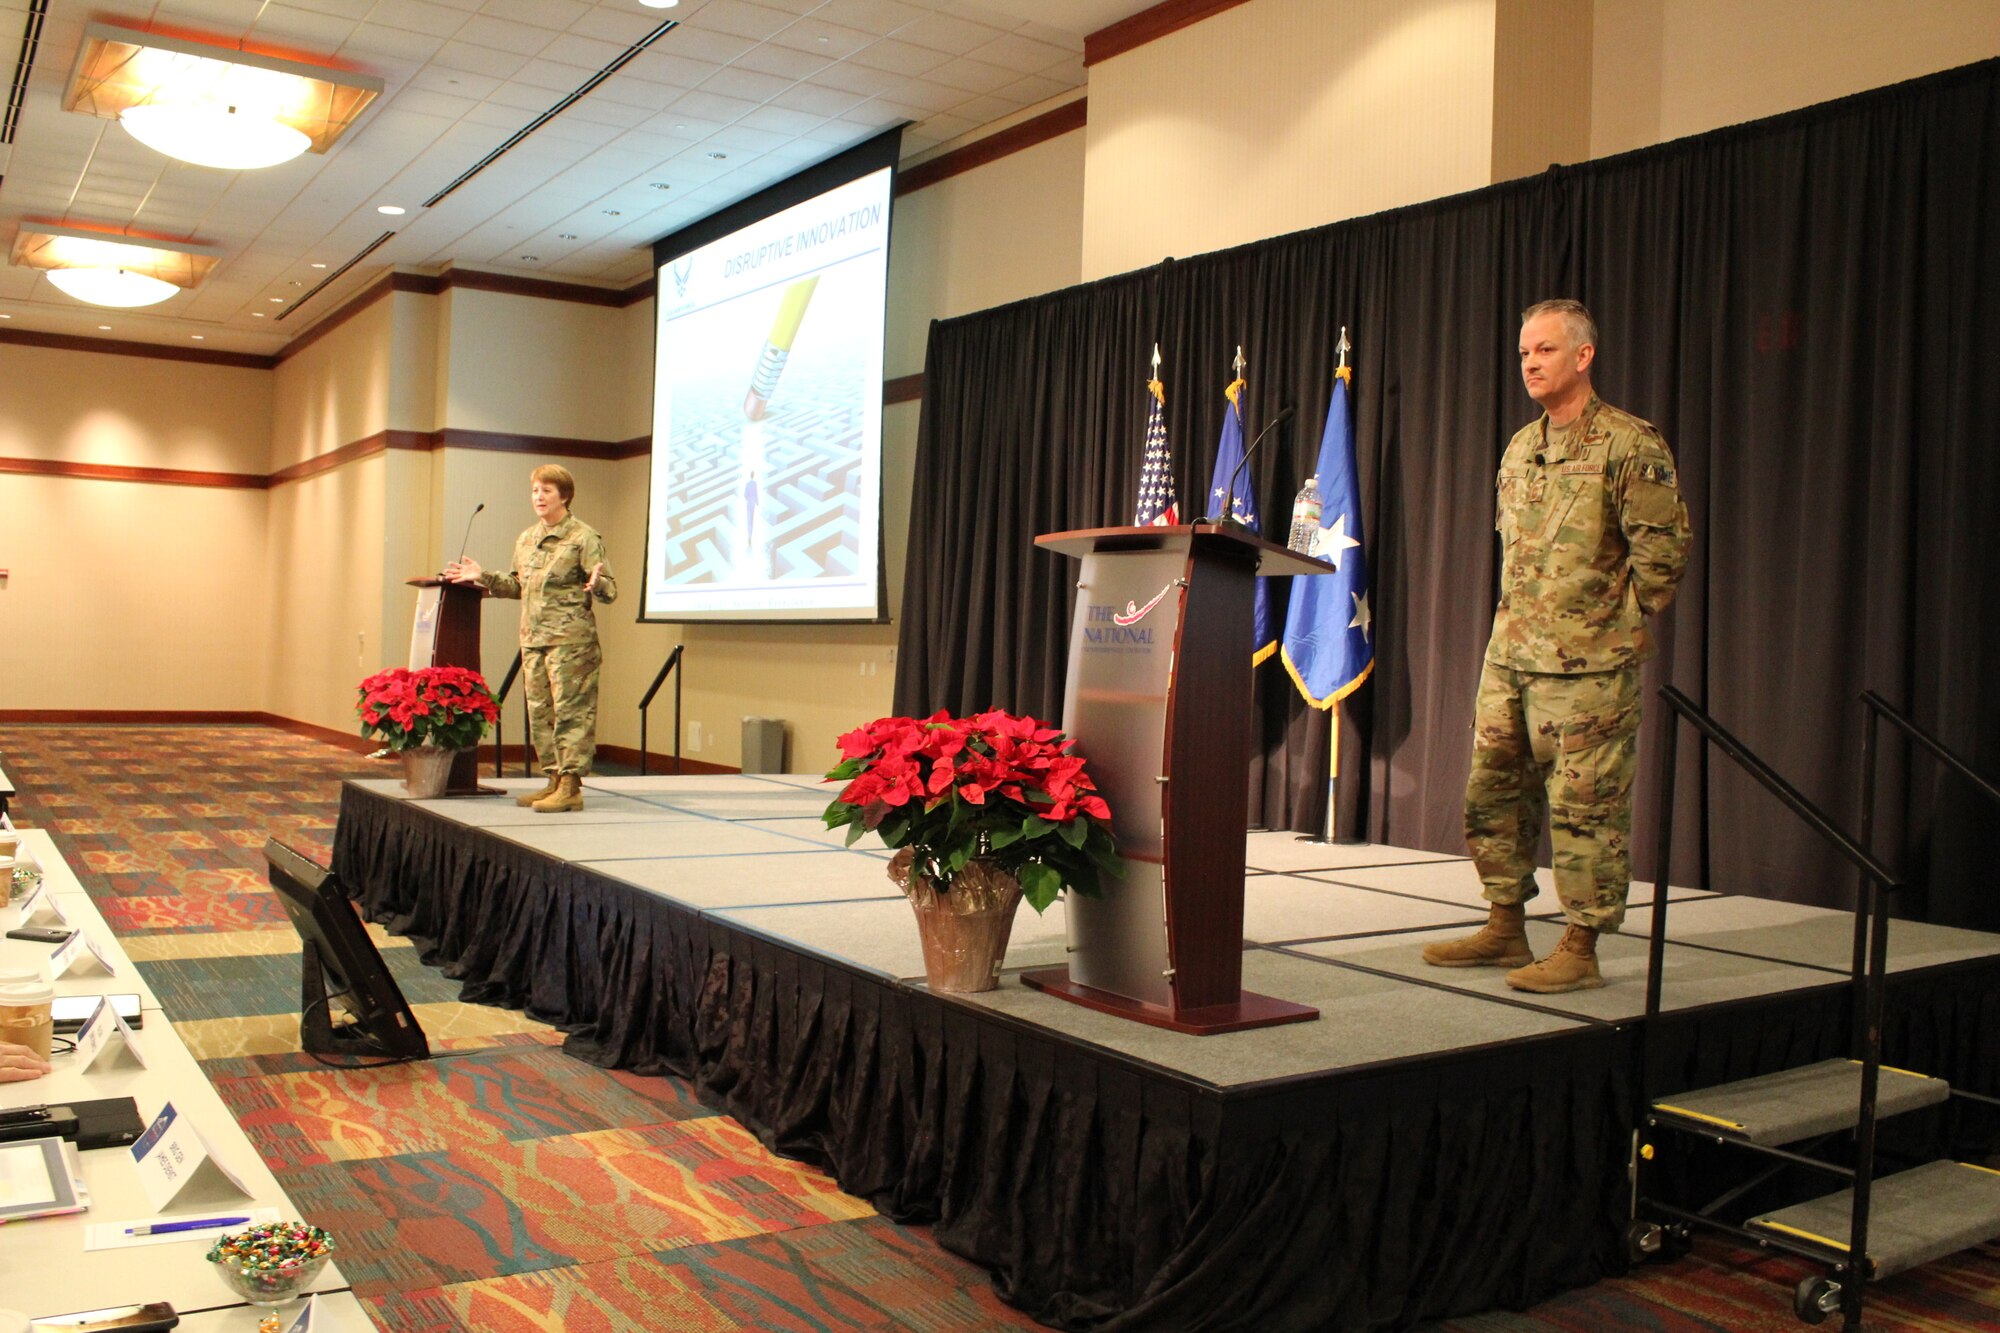 The 2018 Air Force Medical Service Senior Leadership Workshop kicked off this morning at the National Conference Center in Leesburg, Va., with welcome remarks by Lt. Gen. Dorothy Hogg, Air Force Surgeon General, and Chief Master Sgt. G. Steve Cum, Chief, Medical Enlisted Force and Enlisted Corps Chief. They spoke about the future of the AFMS amidst the MHS transformation. "We maintain something more precious than multi-million dollar airplanes, we maintain the Human Weapons System," said Chief Master Sgt. Steve Cum. (U.S. Air Force photo by Josh Mahler)